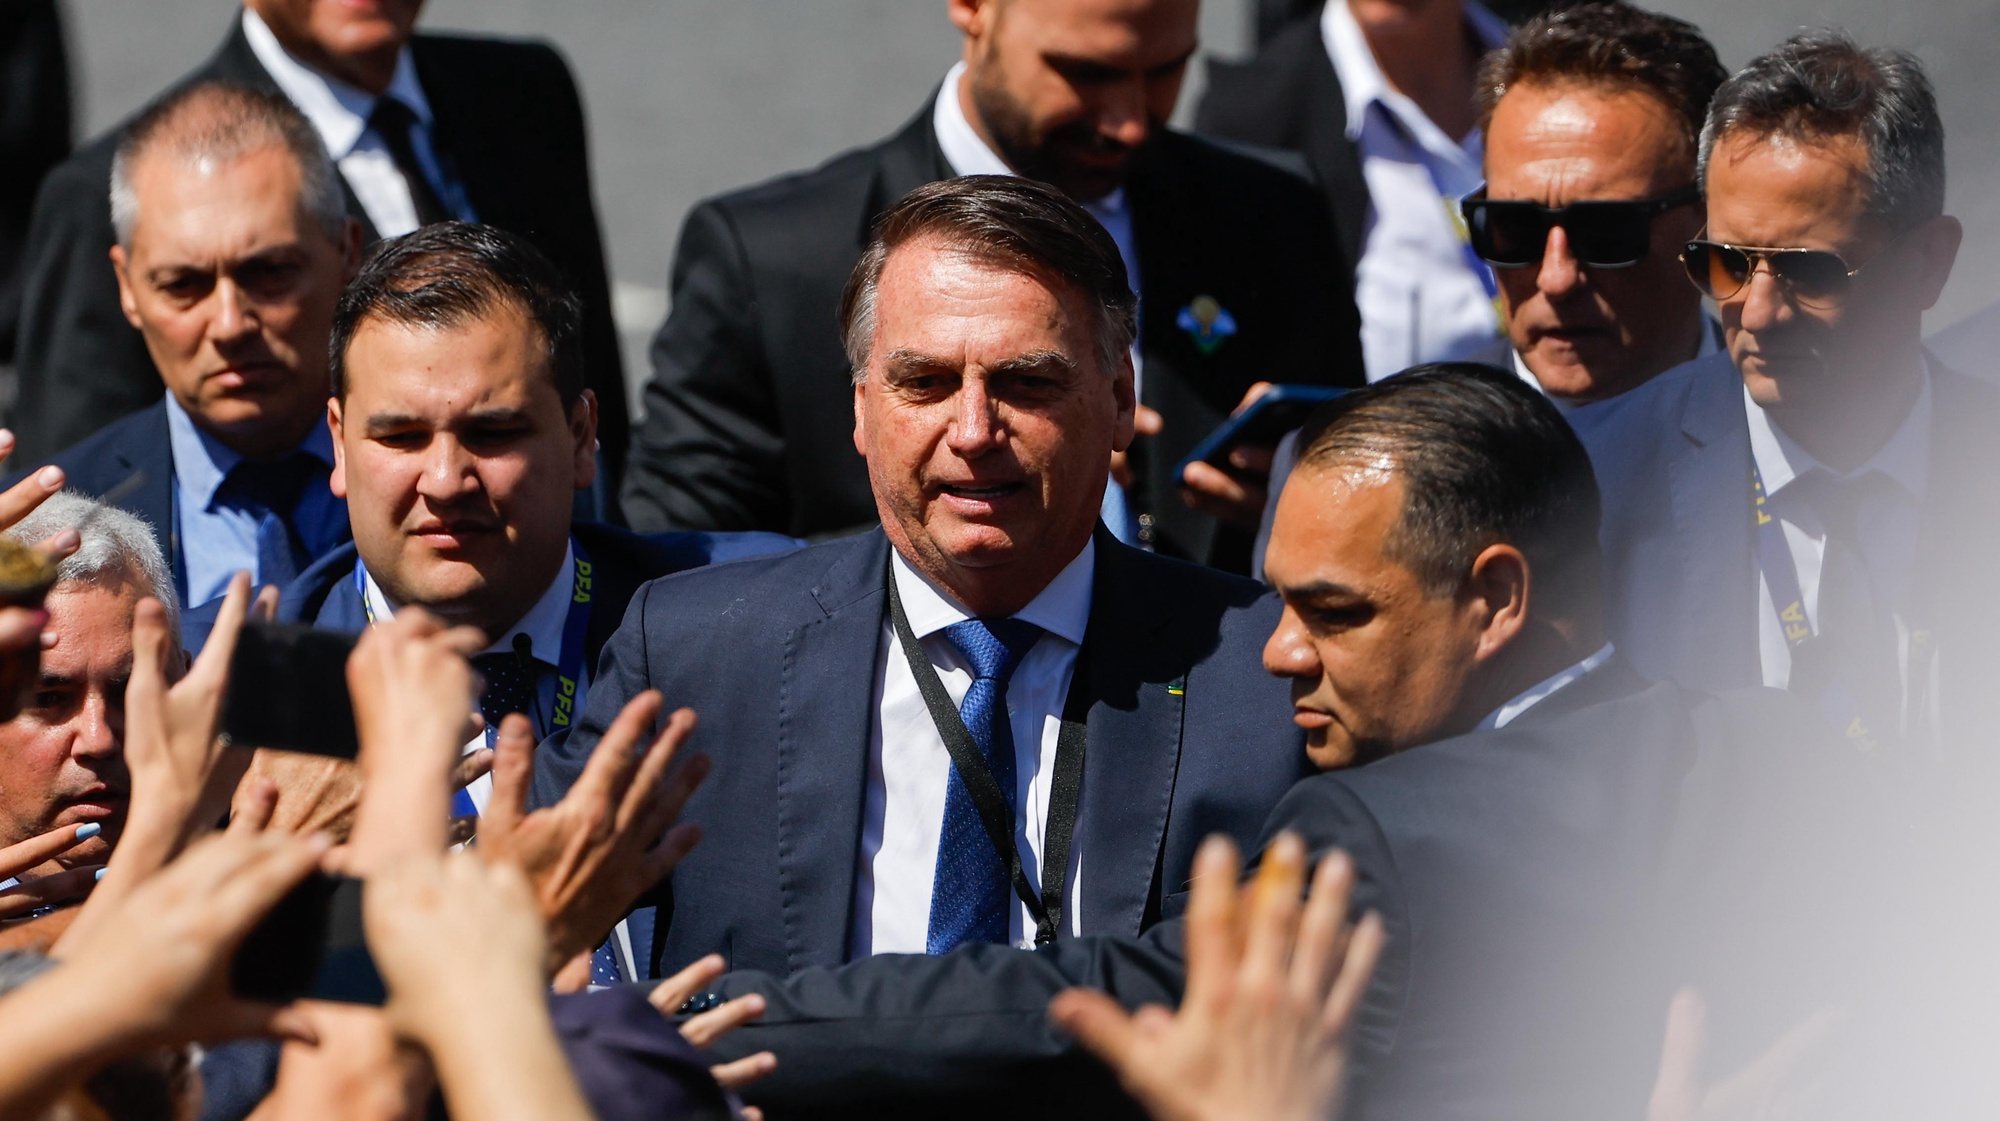 epa11021294 Former Brazilian President Jair Bolsonaro (C) arrives at the Argentine National Congress to attend the ceremony in which president-elect Javier Milei will be sworn in as president of Argentina in Buenos Aires, Argentina, 10 December 2023. The far-right libertarian economist Milei will be sworn in at the National Congress to become president of the South American country for the period 2023-2027 after winning the runoff election on 19 November.  EPA/Juan Ignacio Roncoroni